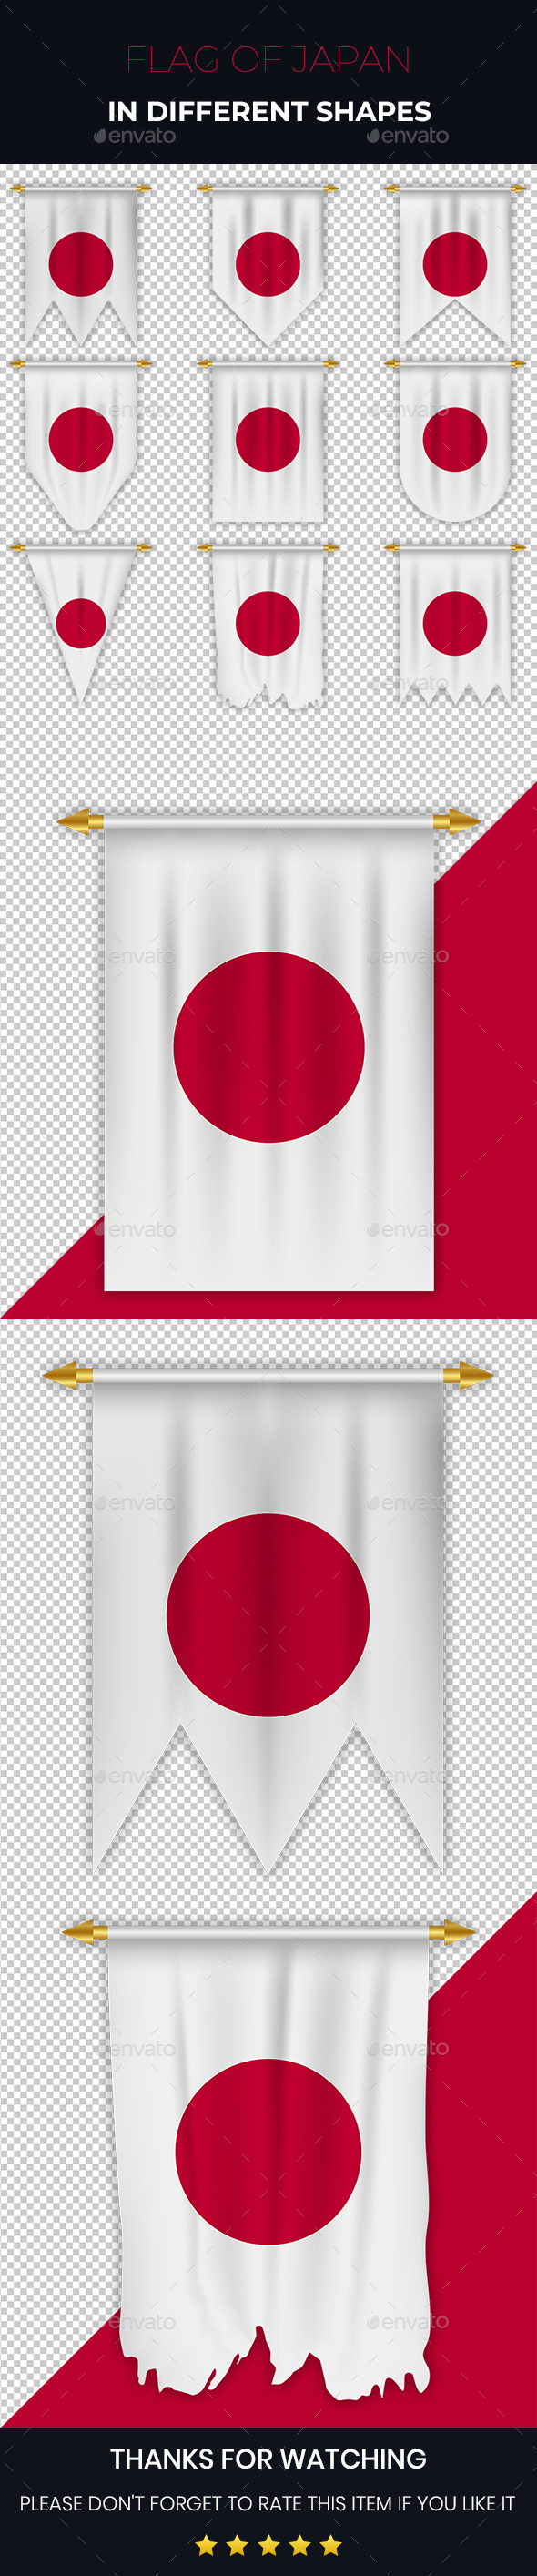 Japan Flag in Different Shapes